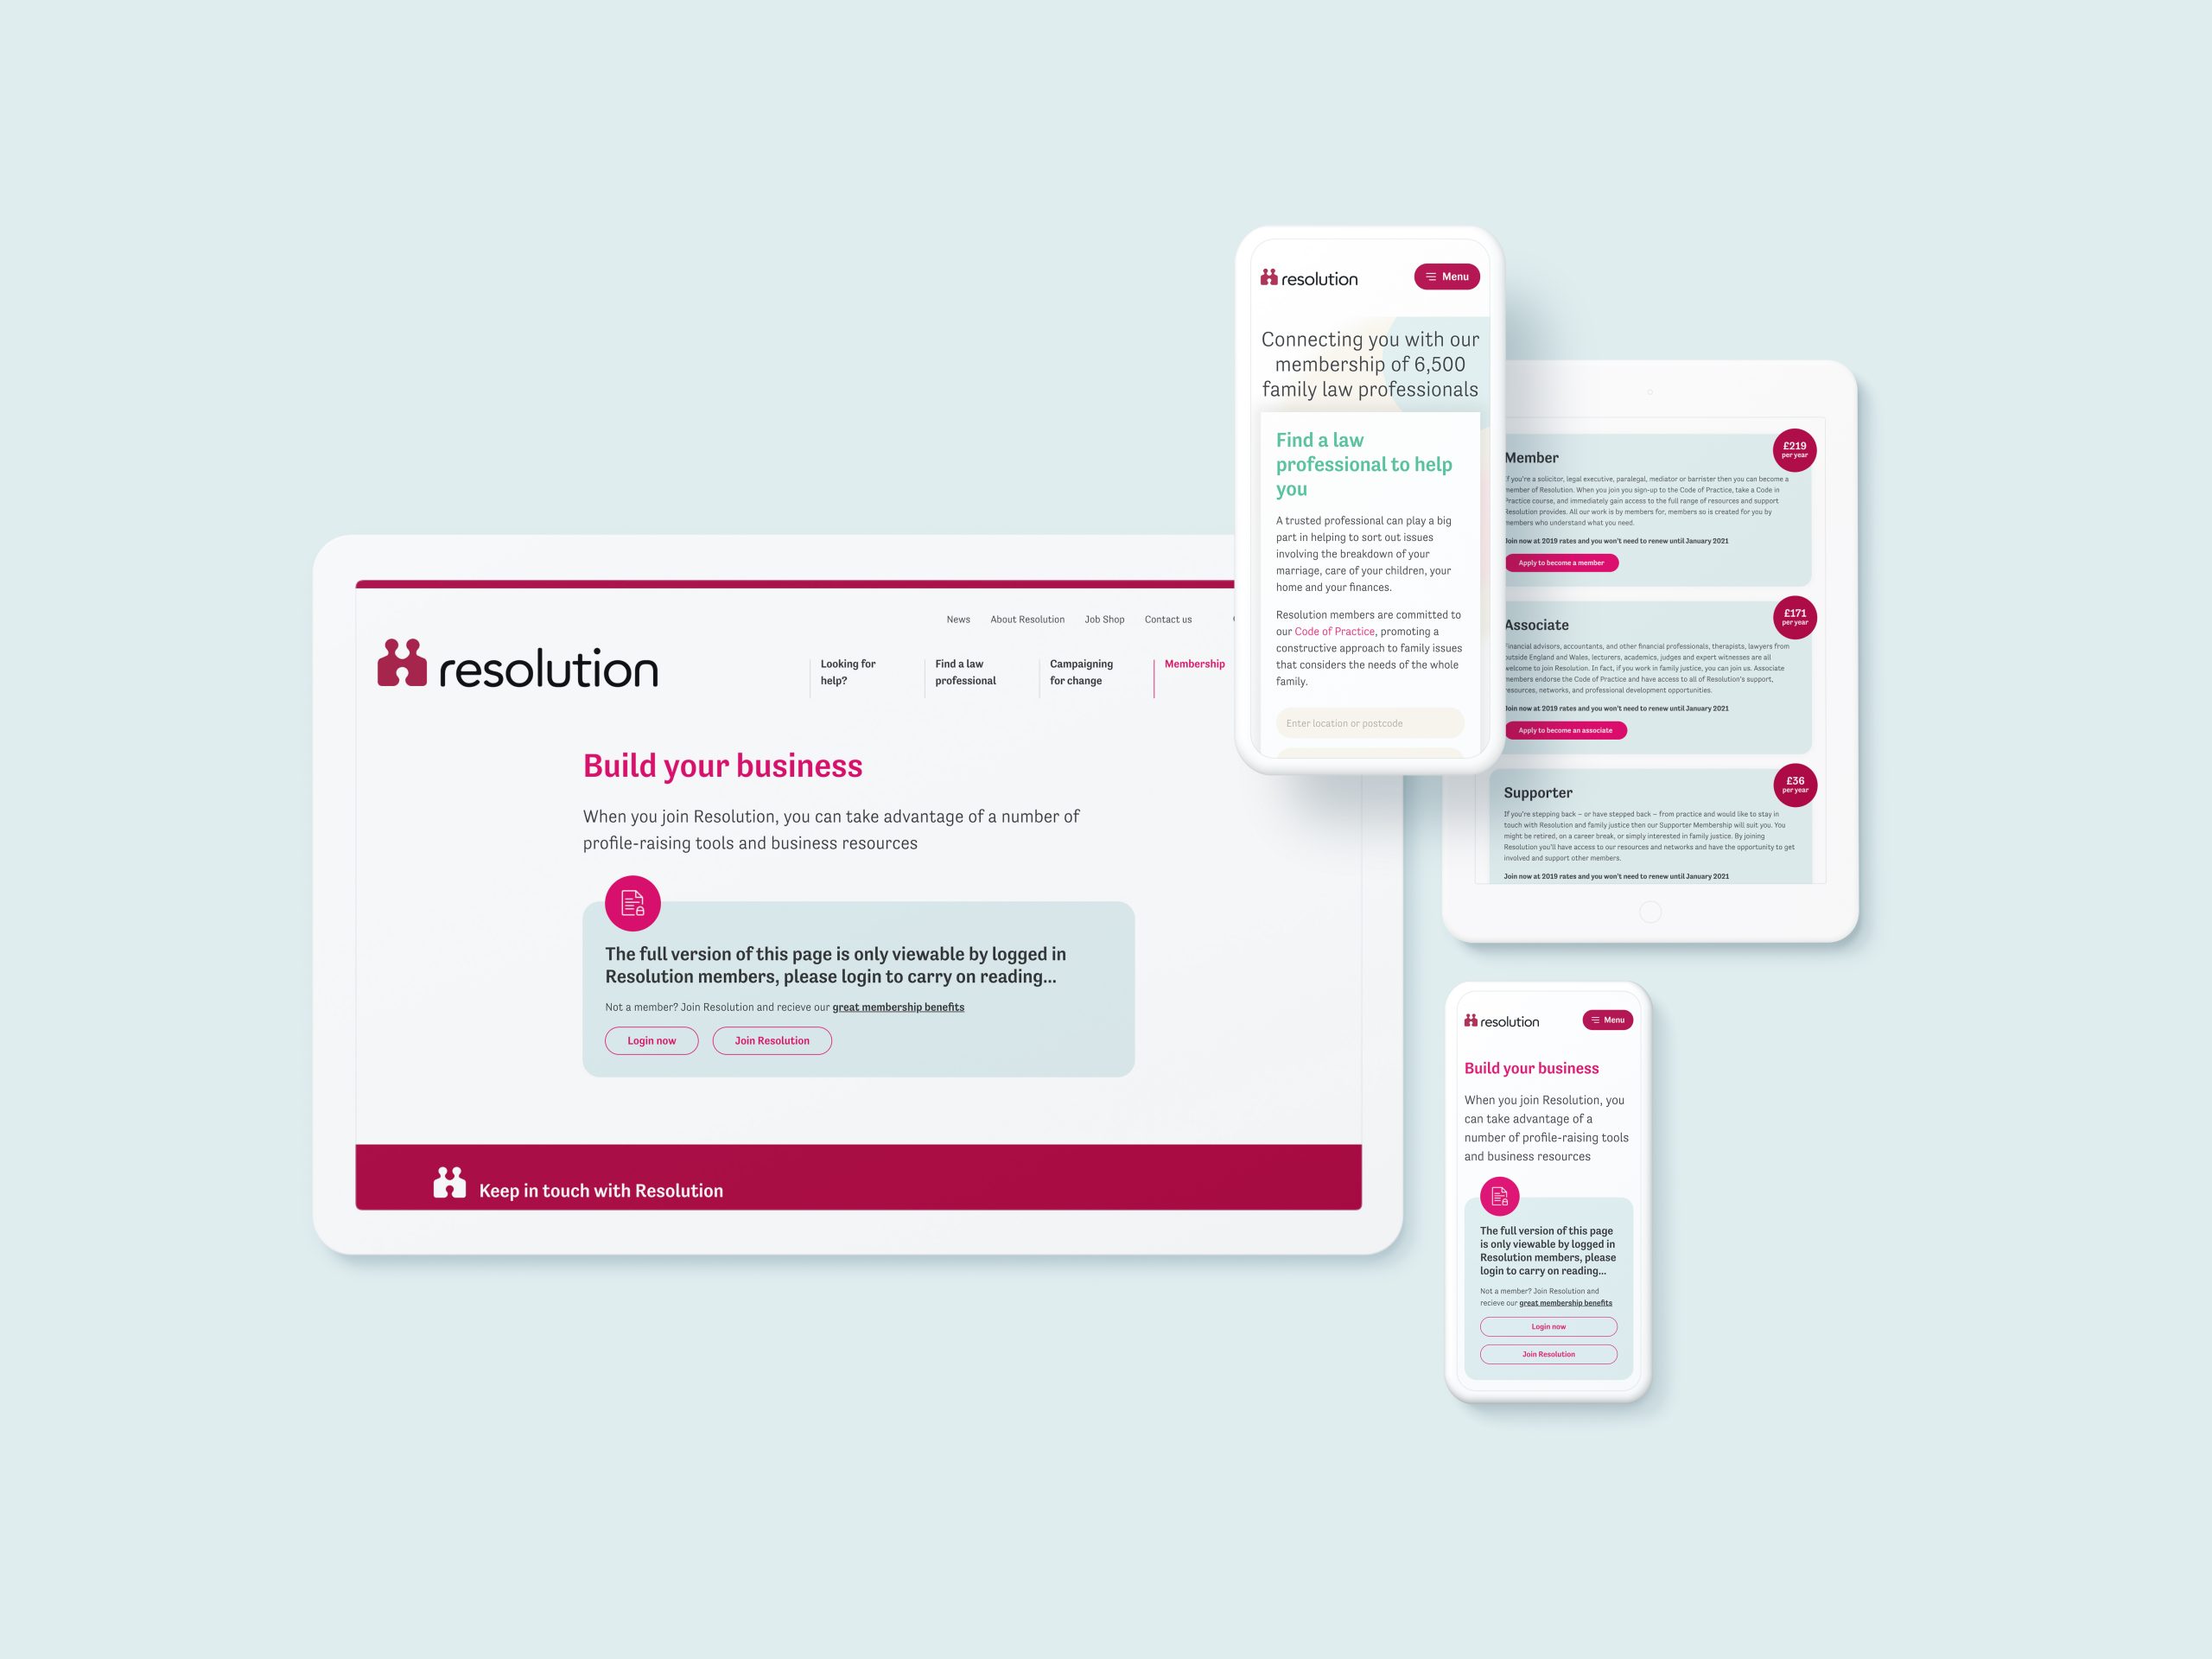 Key landing pages from Resolution's new site